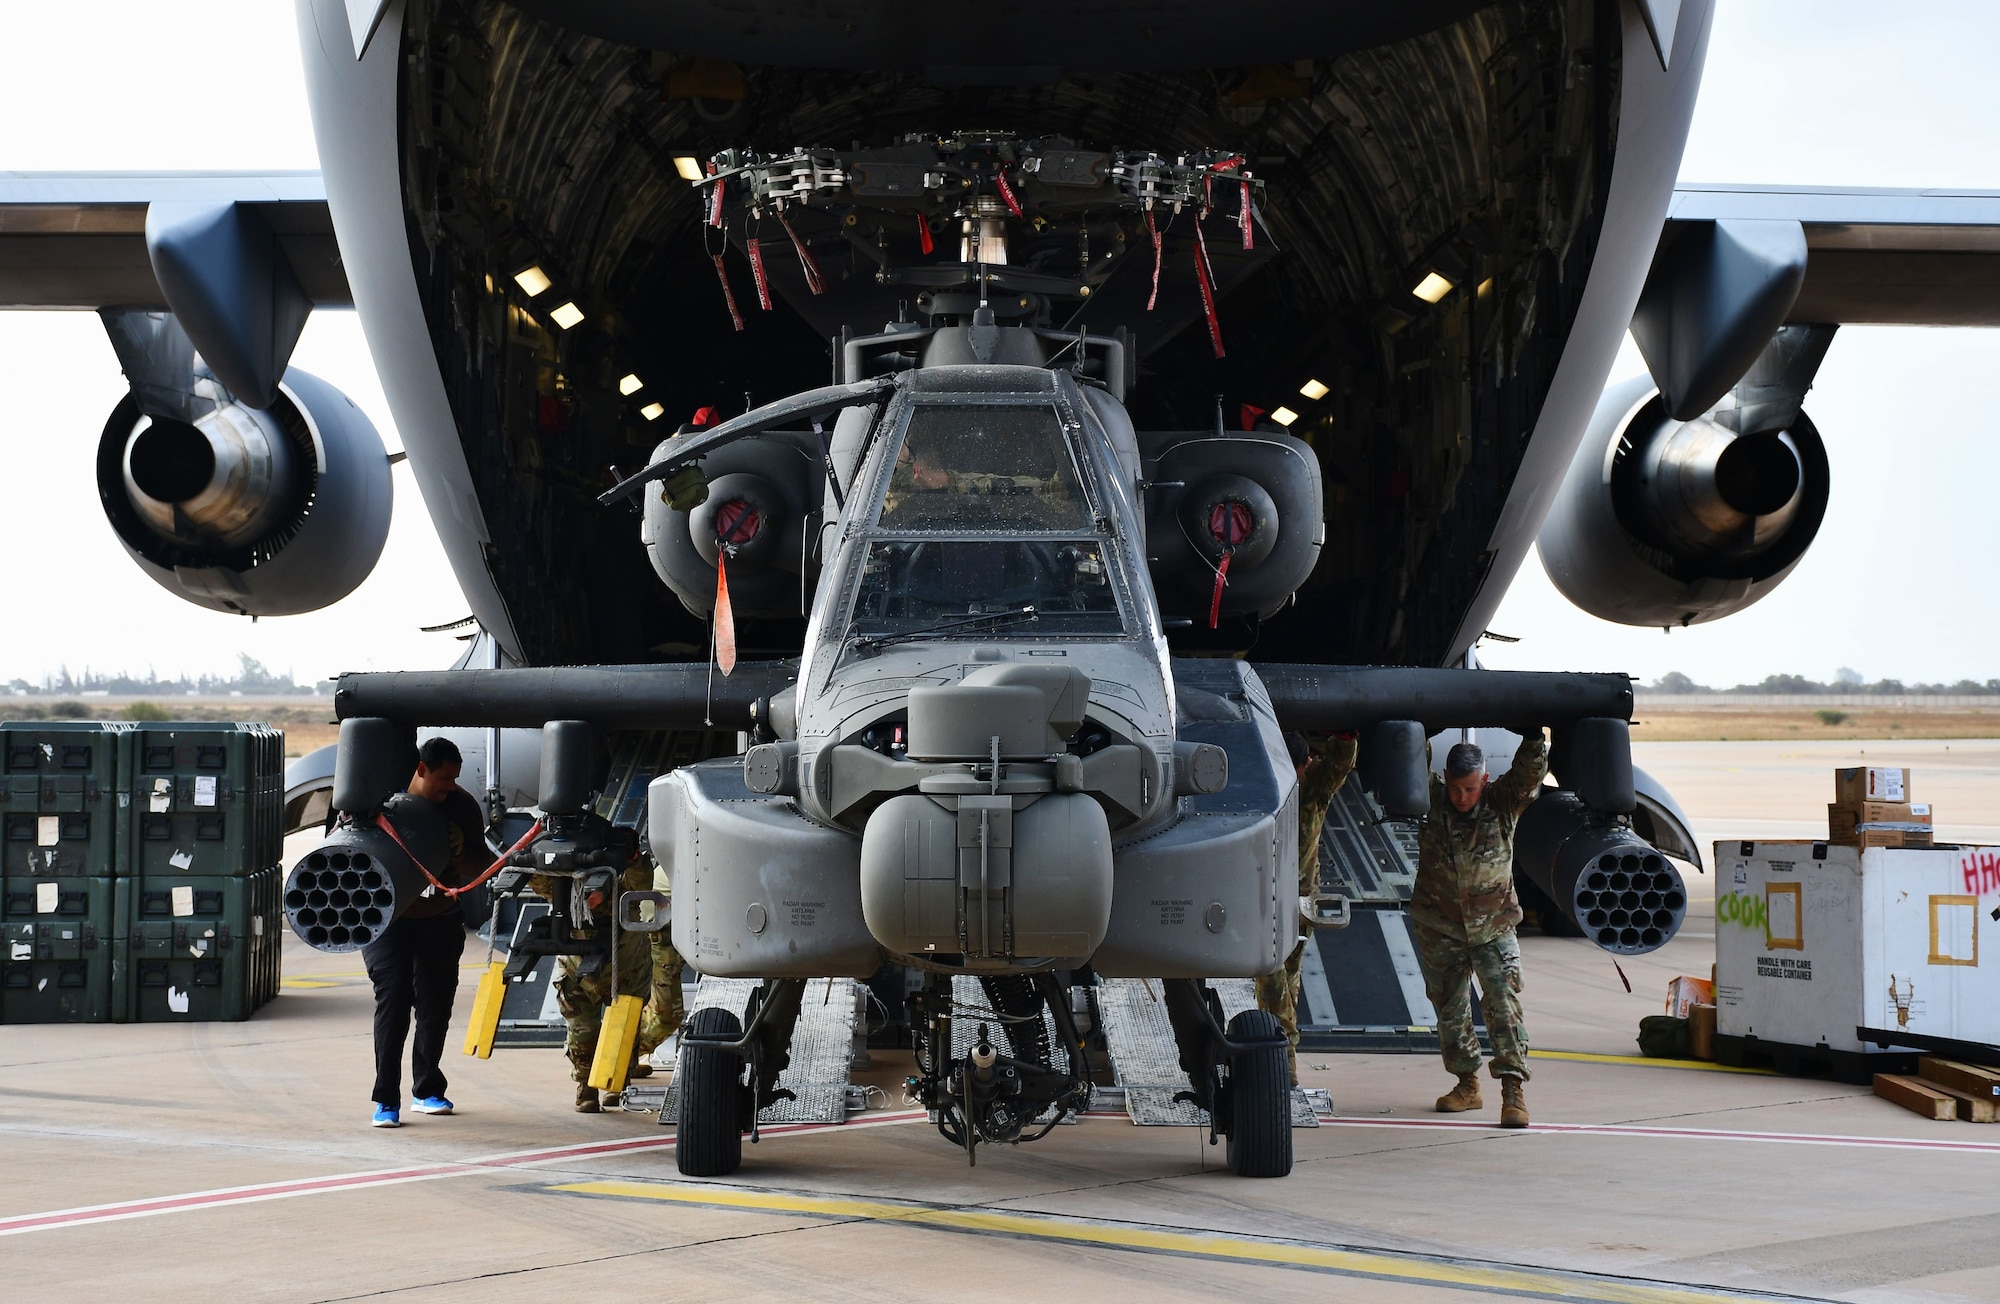 Soldiers from 1st Battalion, 211th Aviation Regiment, Utah National Guard, help guide an AH-64 Apache attack helicopter off a C-17 Globemaster III, Agadir-Al Massara International Airport, Agadir, Morocco, May 17, 2024, in preparation for African Lion 2024. This year marks the 20th anniversary of U.S. Africa Command’s premier joint exercise led by U.S. Army Southern European Task Force, Africa (SETAF-AF), running from April 19 to May 31 across Ghana, Morocco, Senegal and Tunisia, with over 8,100 participants from 27 nations and NATO contingents. (U.S. Army photo by Maj. Alun Thomas)